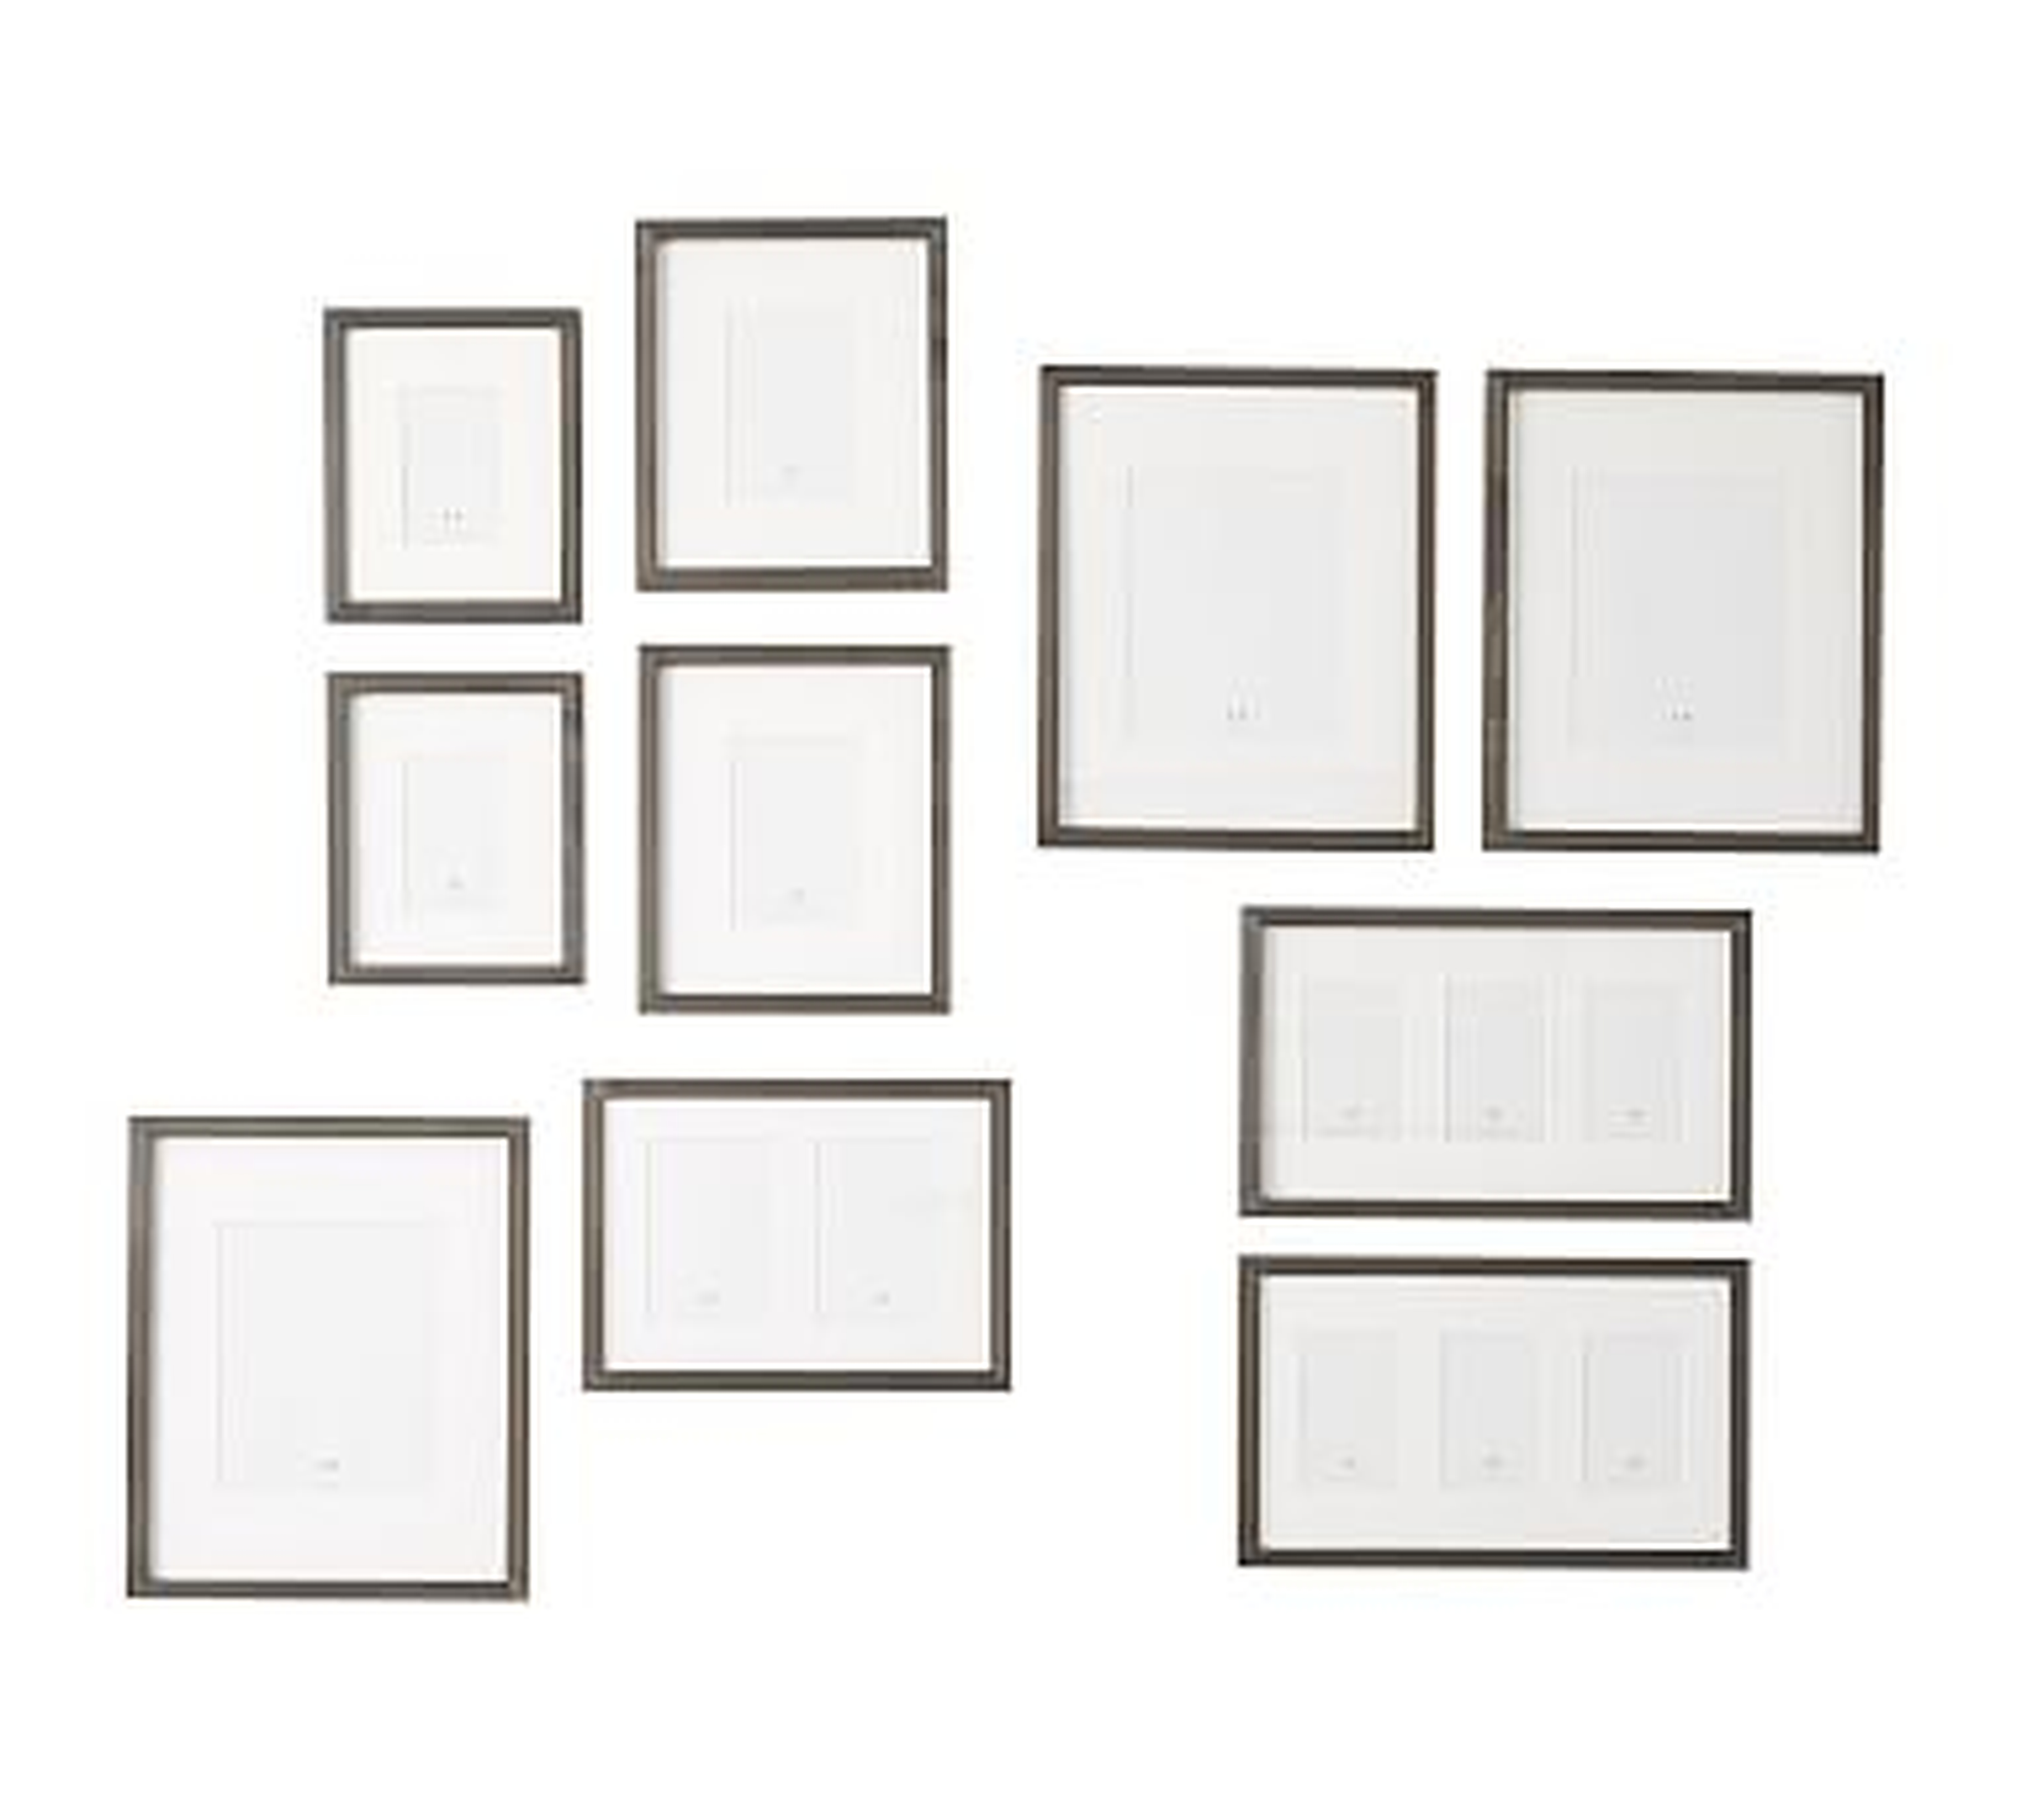 Wood Gallery in a Box Frames, Graywash - Set of 10 - Pottery Barn